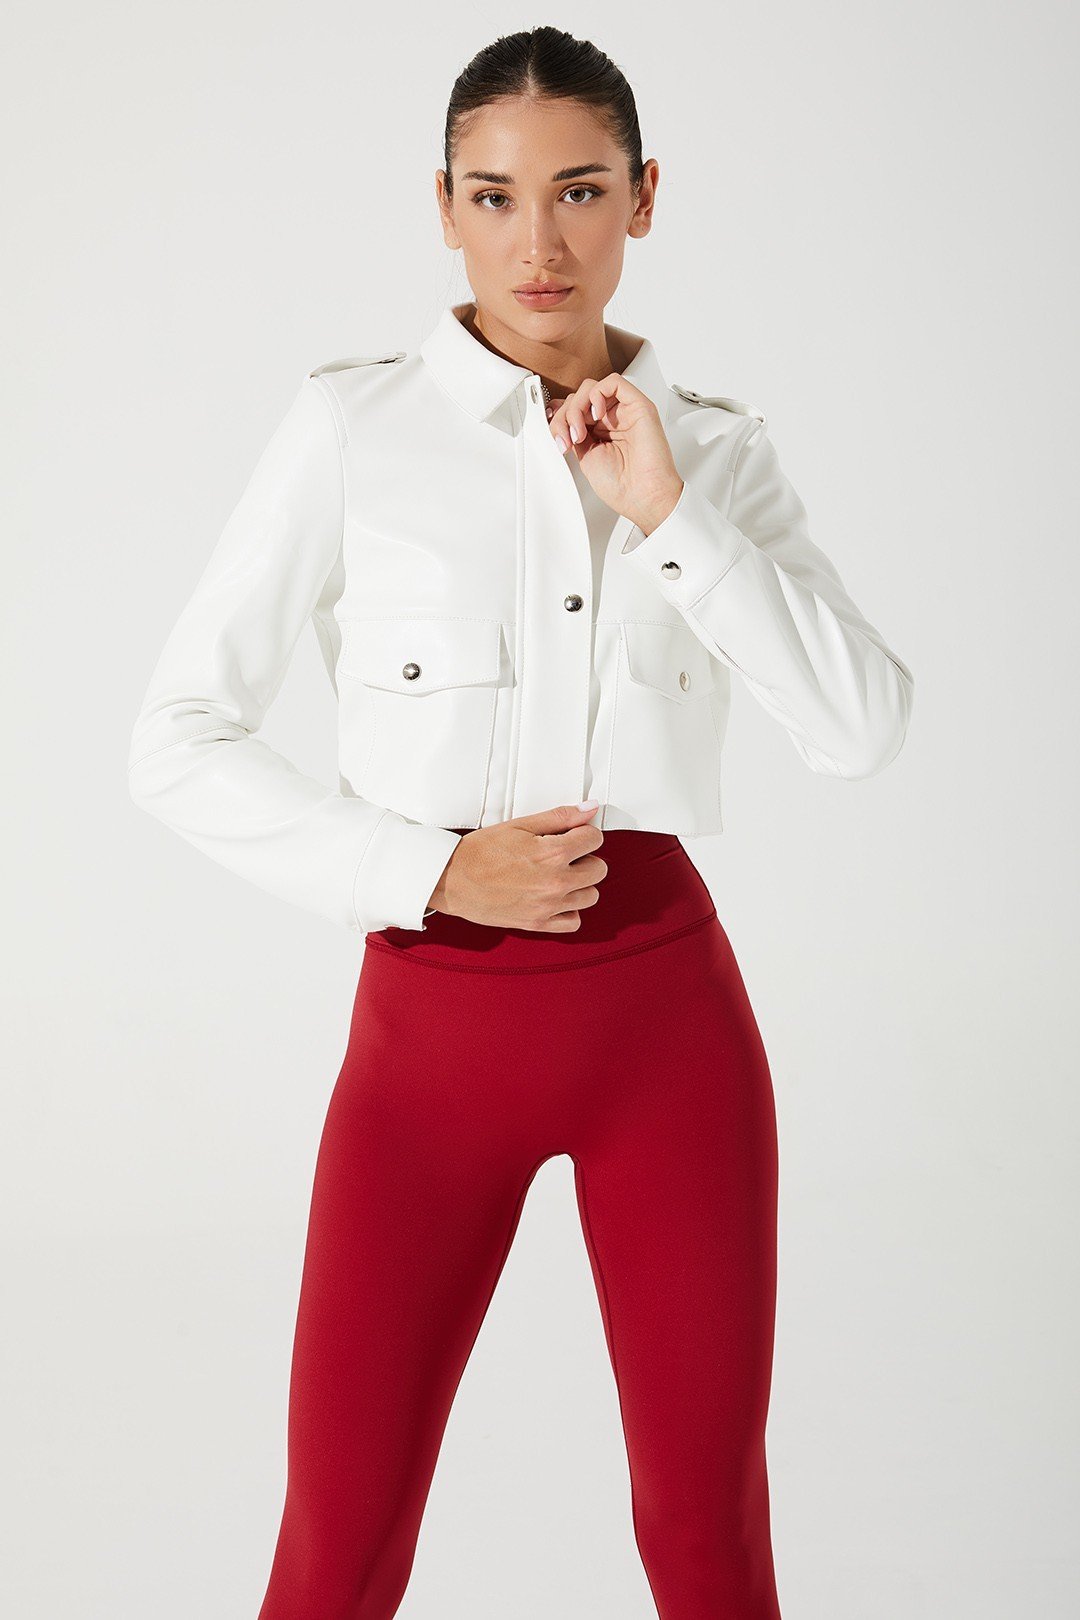 Stylish urban rebel women's white jacket with a touch of elegance - OW-0042-WJK-WT_1.jpg.